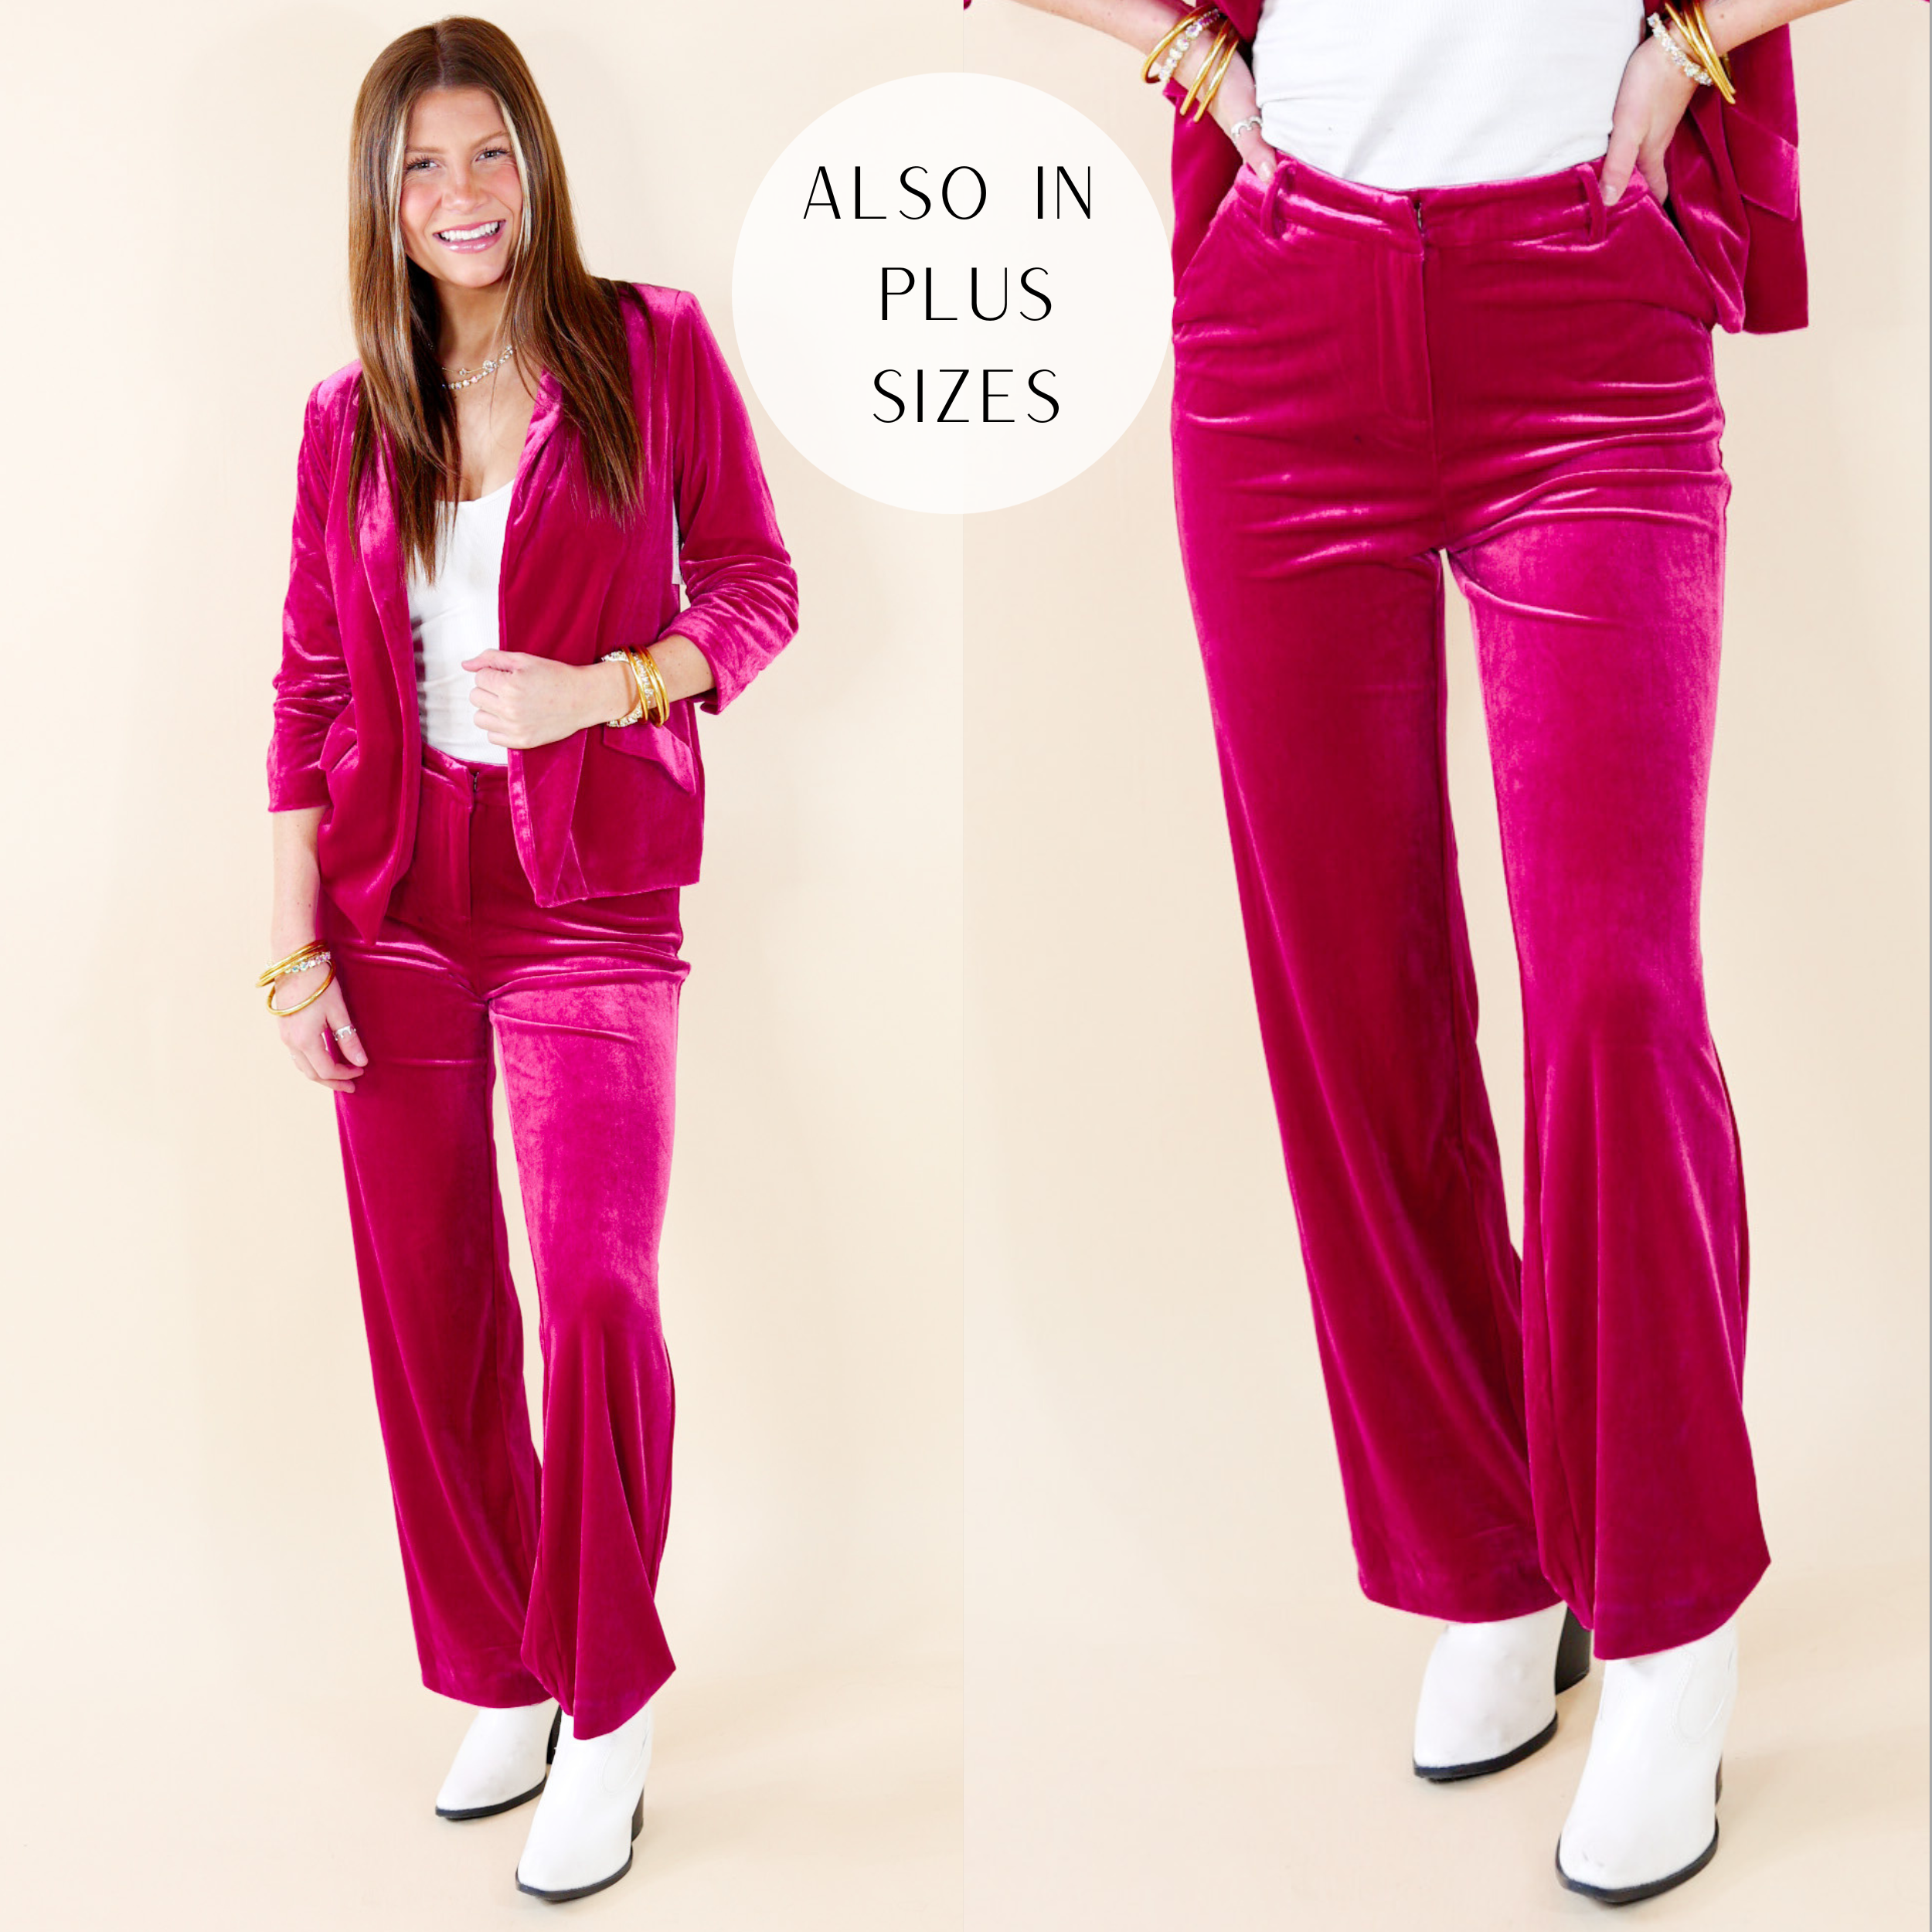 Velet Pink outfit. The trousers have a belt loop and zipper. The model is wearing this outfit with gold jewelry and white booties.